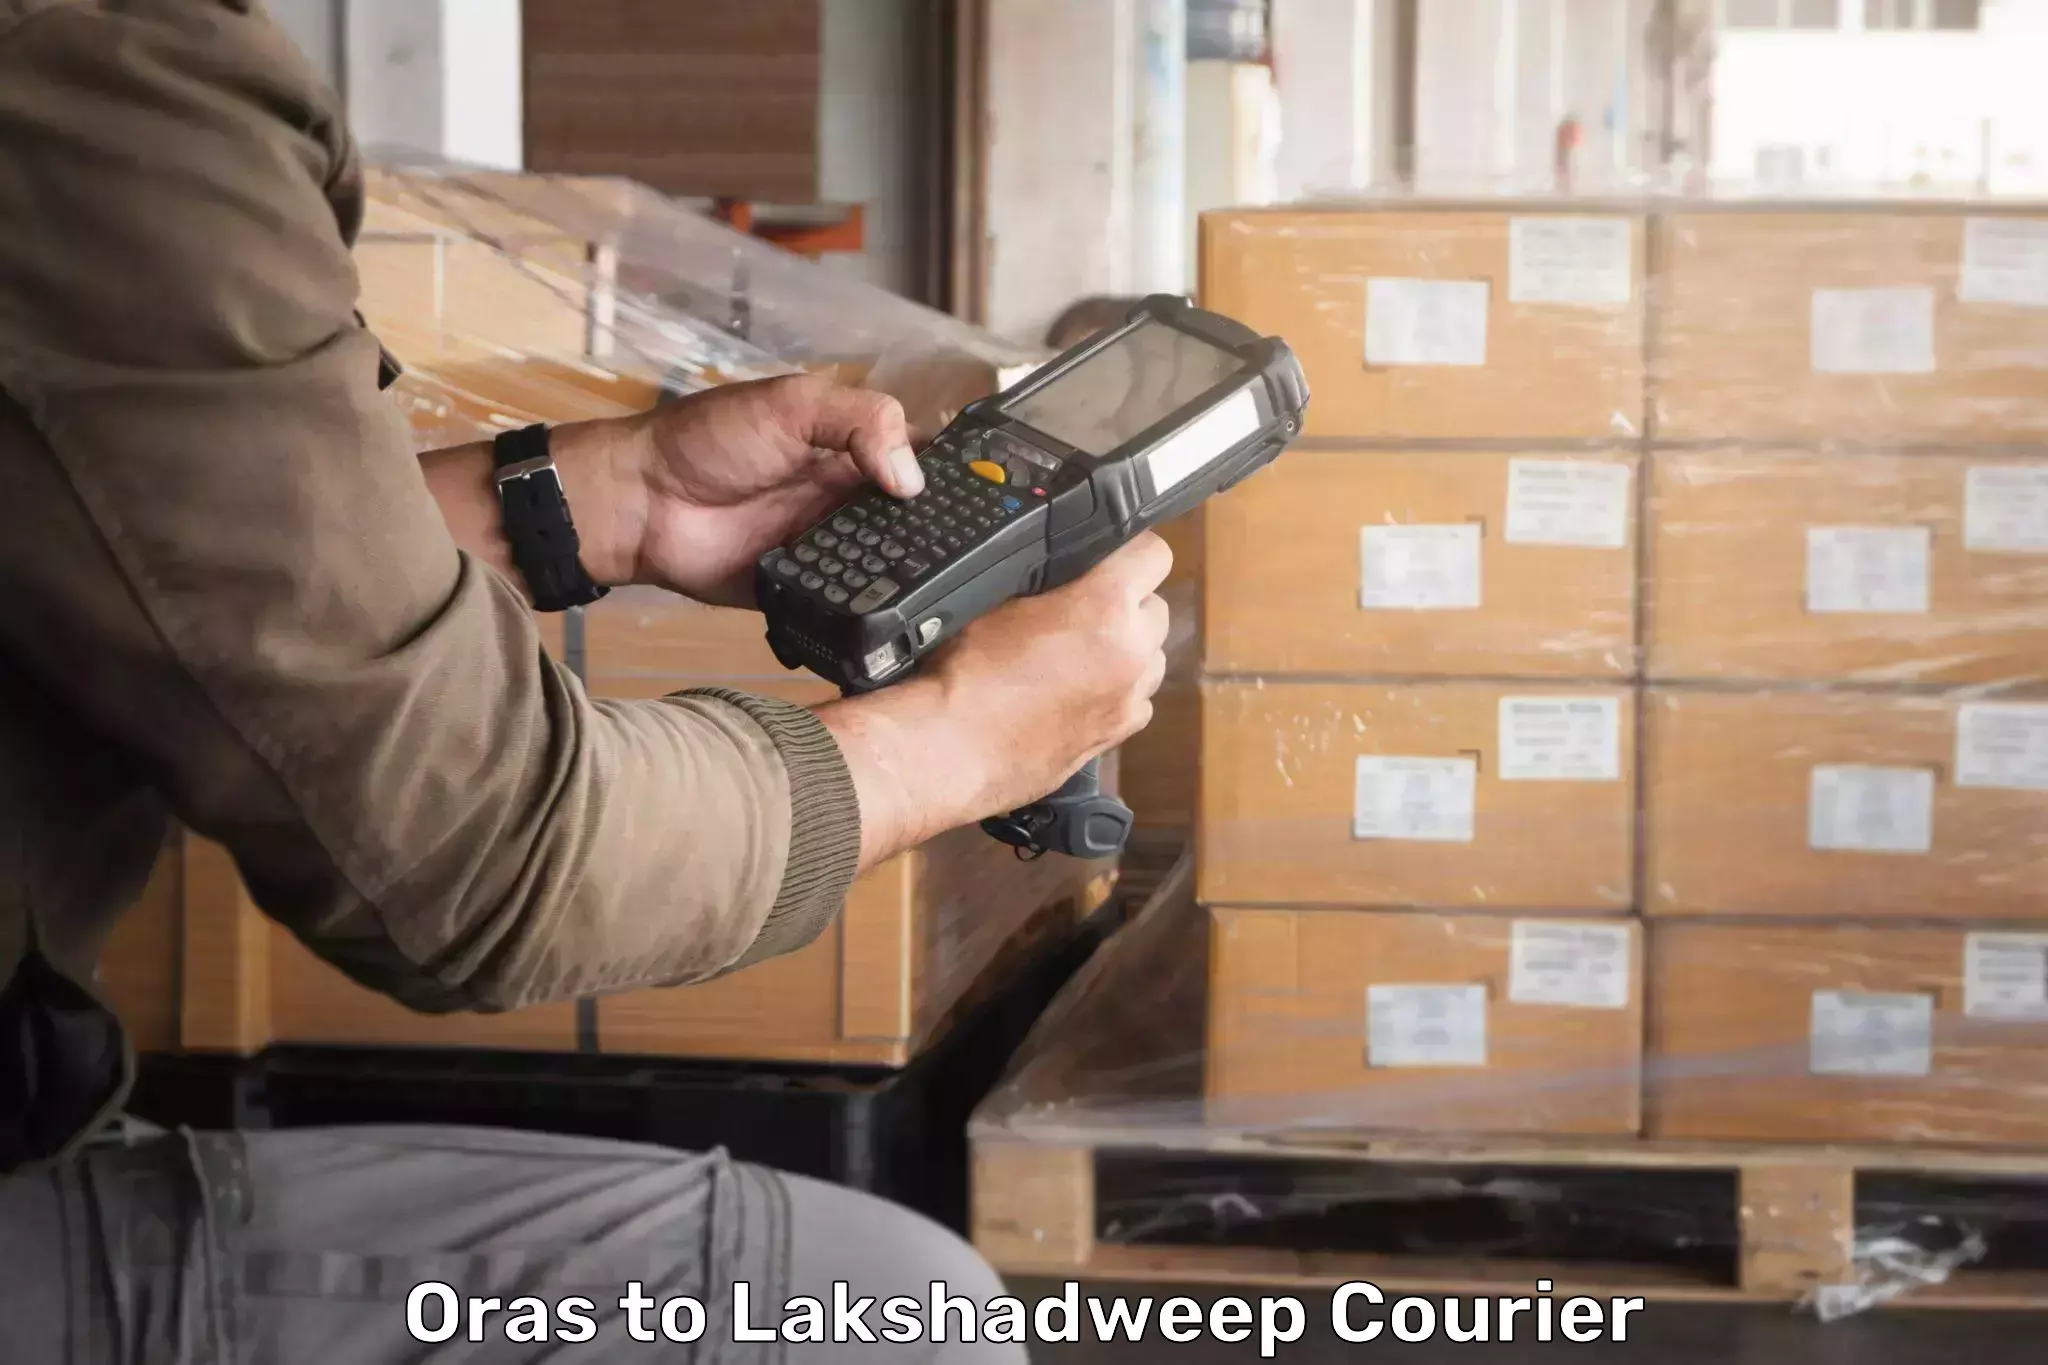 Business shipping needs in Oras to Lakshadweep